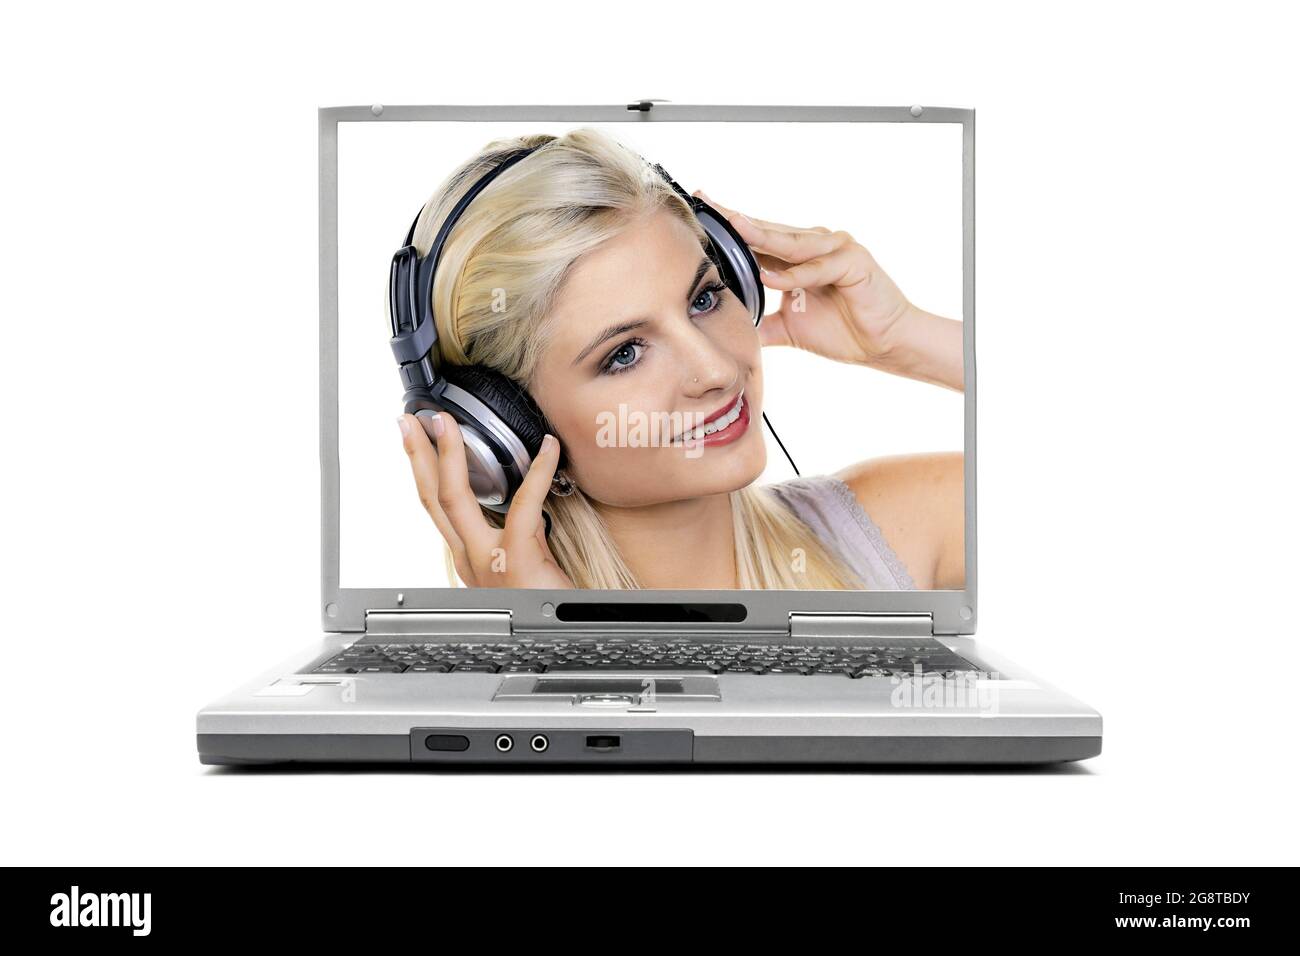 image 'woman with headphones listening to music' on a laptop display Stock Photo